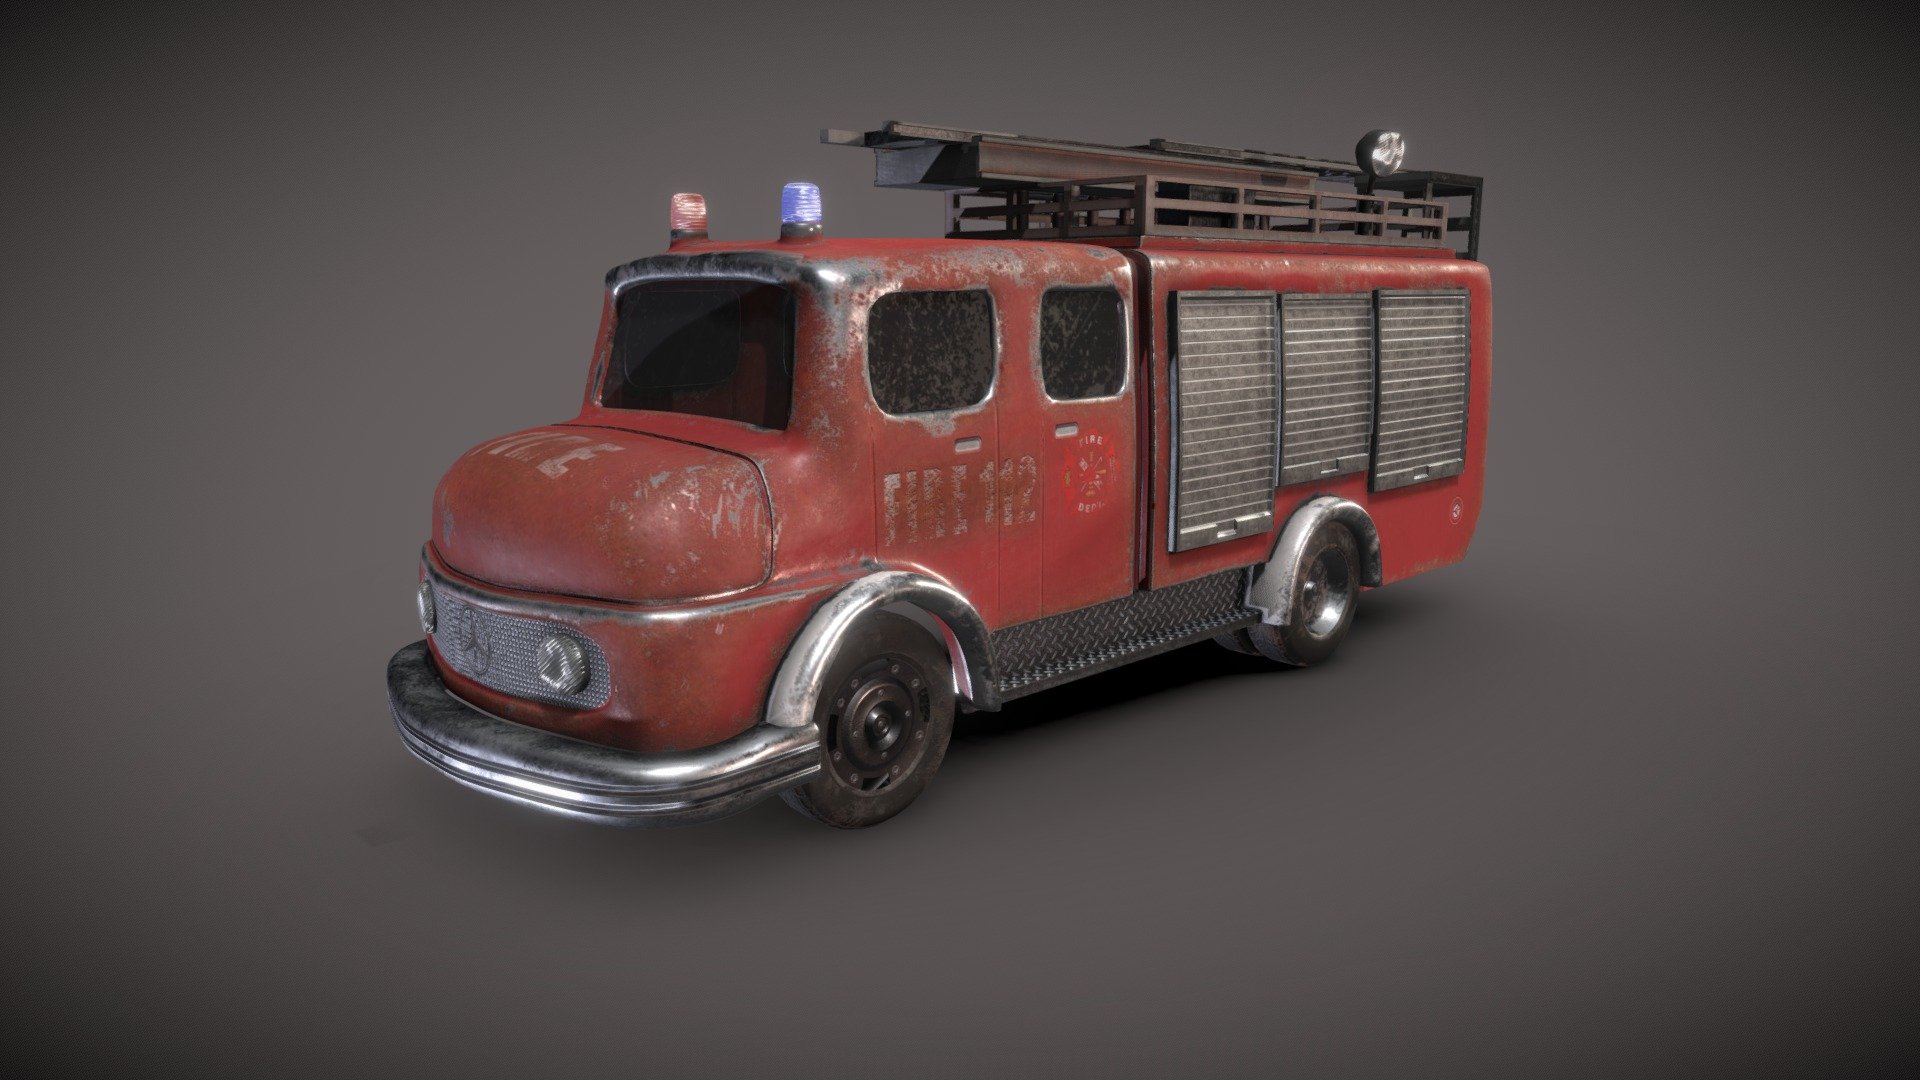 Simple  vintage firetruck based on the mercedes-benz-lf1113.  

Model ais seperated into different parts.

Chassis 
ladder
wheels 
lights
shutters
windows

Zip file containers 4K PBR textures 3d model